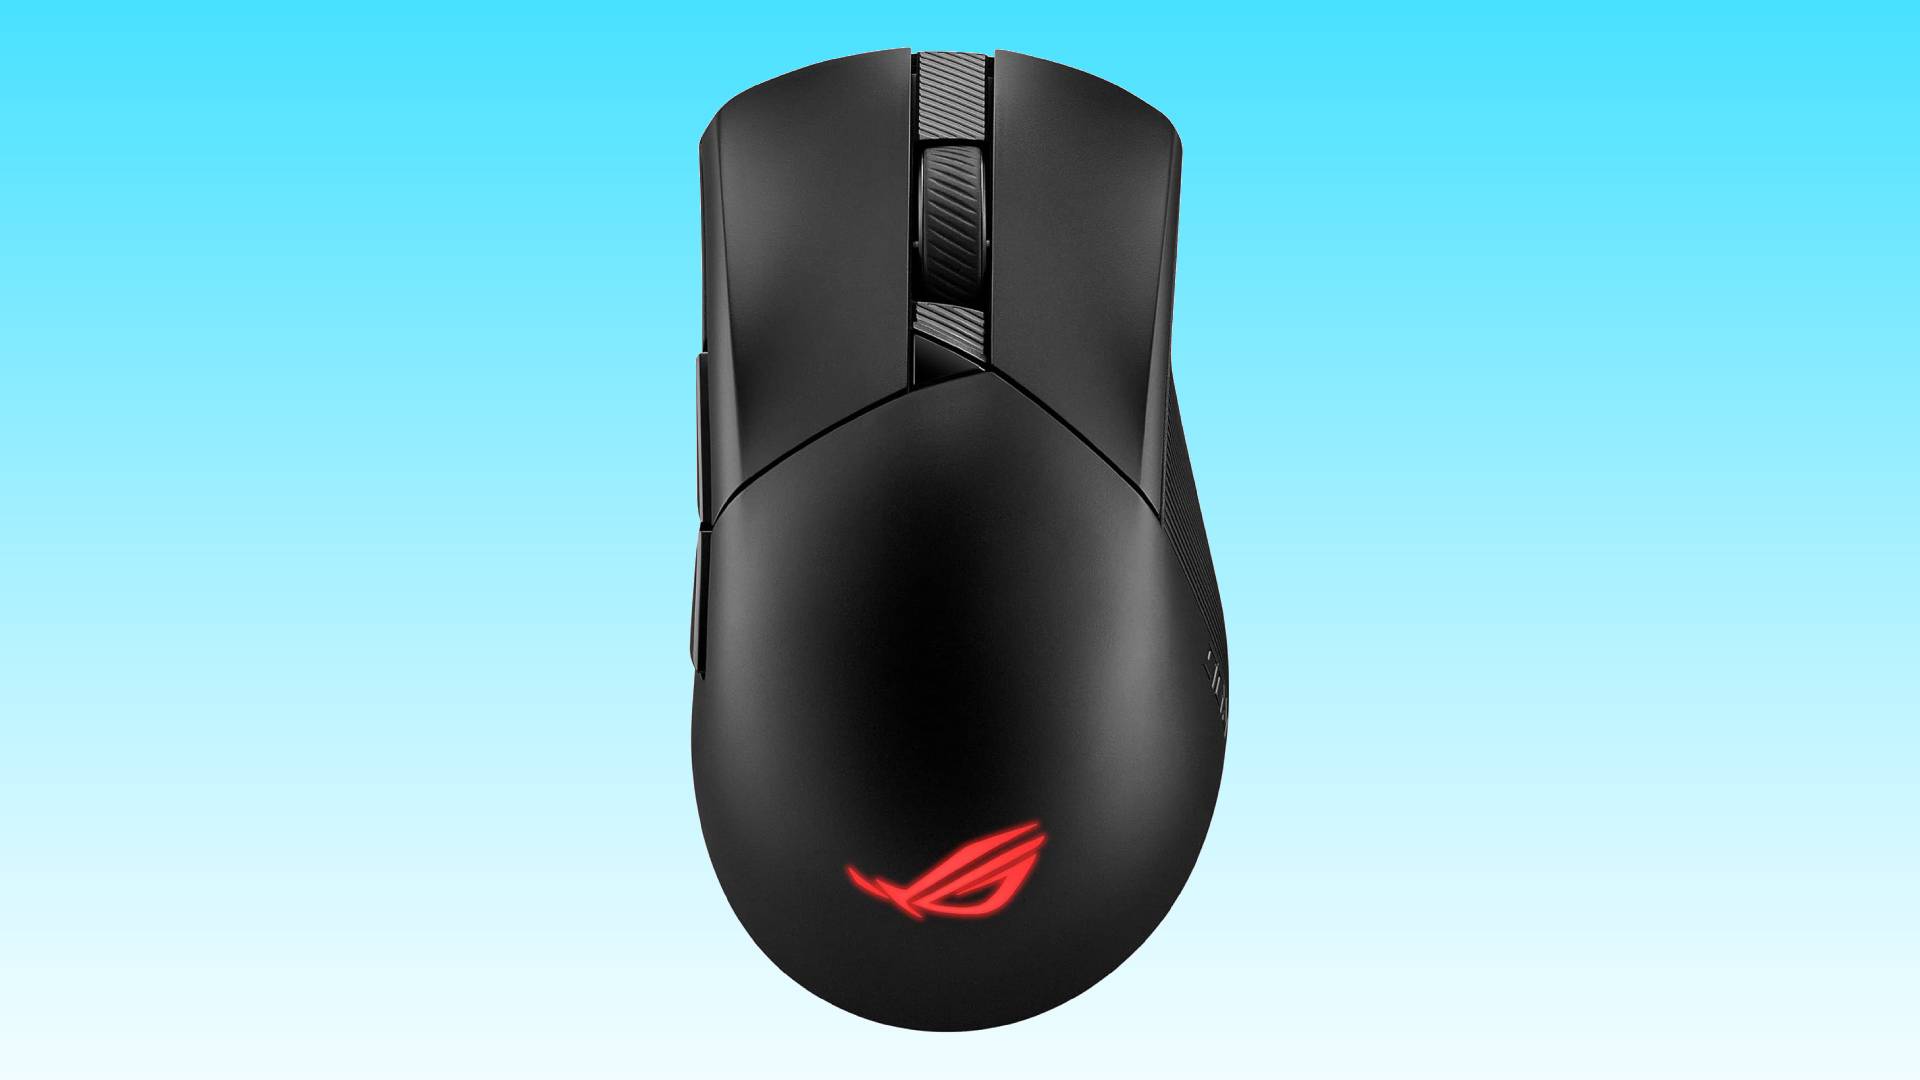 Amazon deal slices price of this ASUS gaming mouse; perfect for competitive gaming